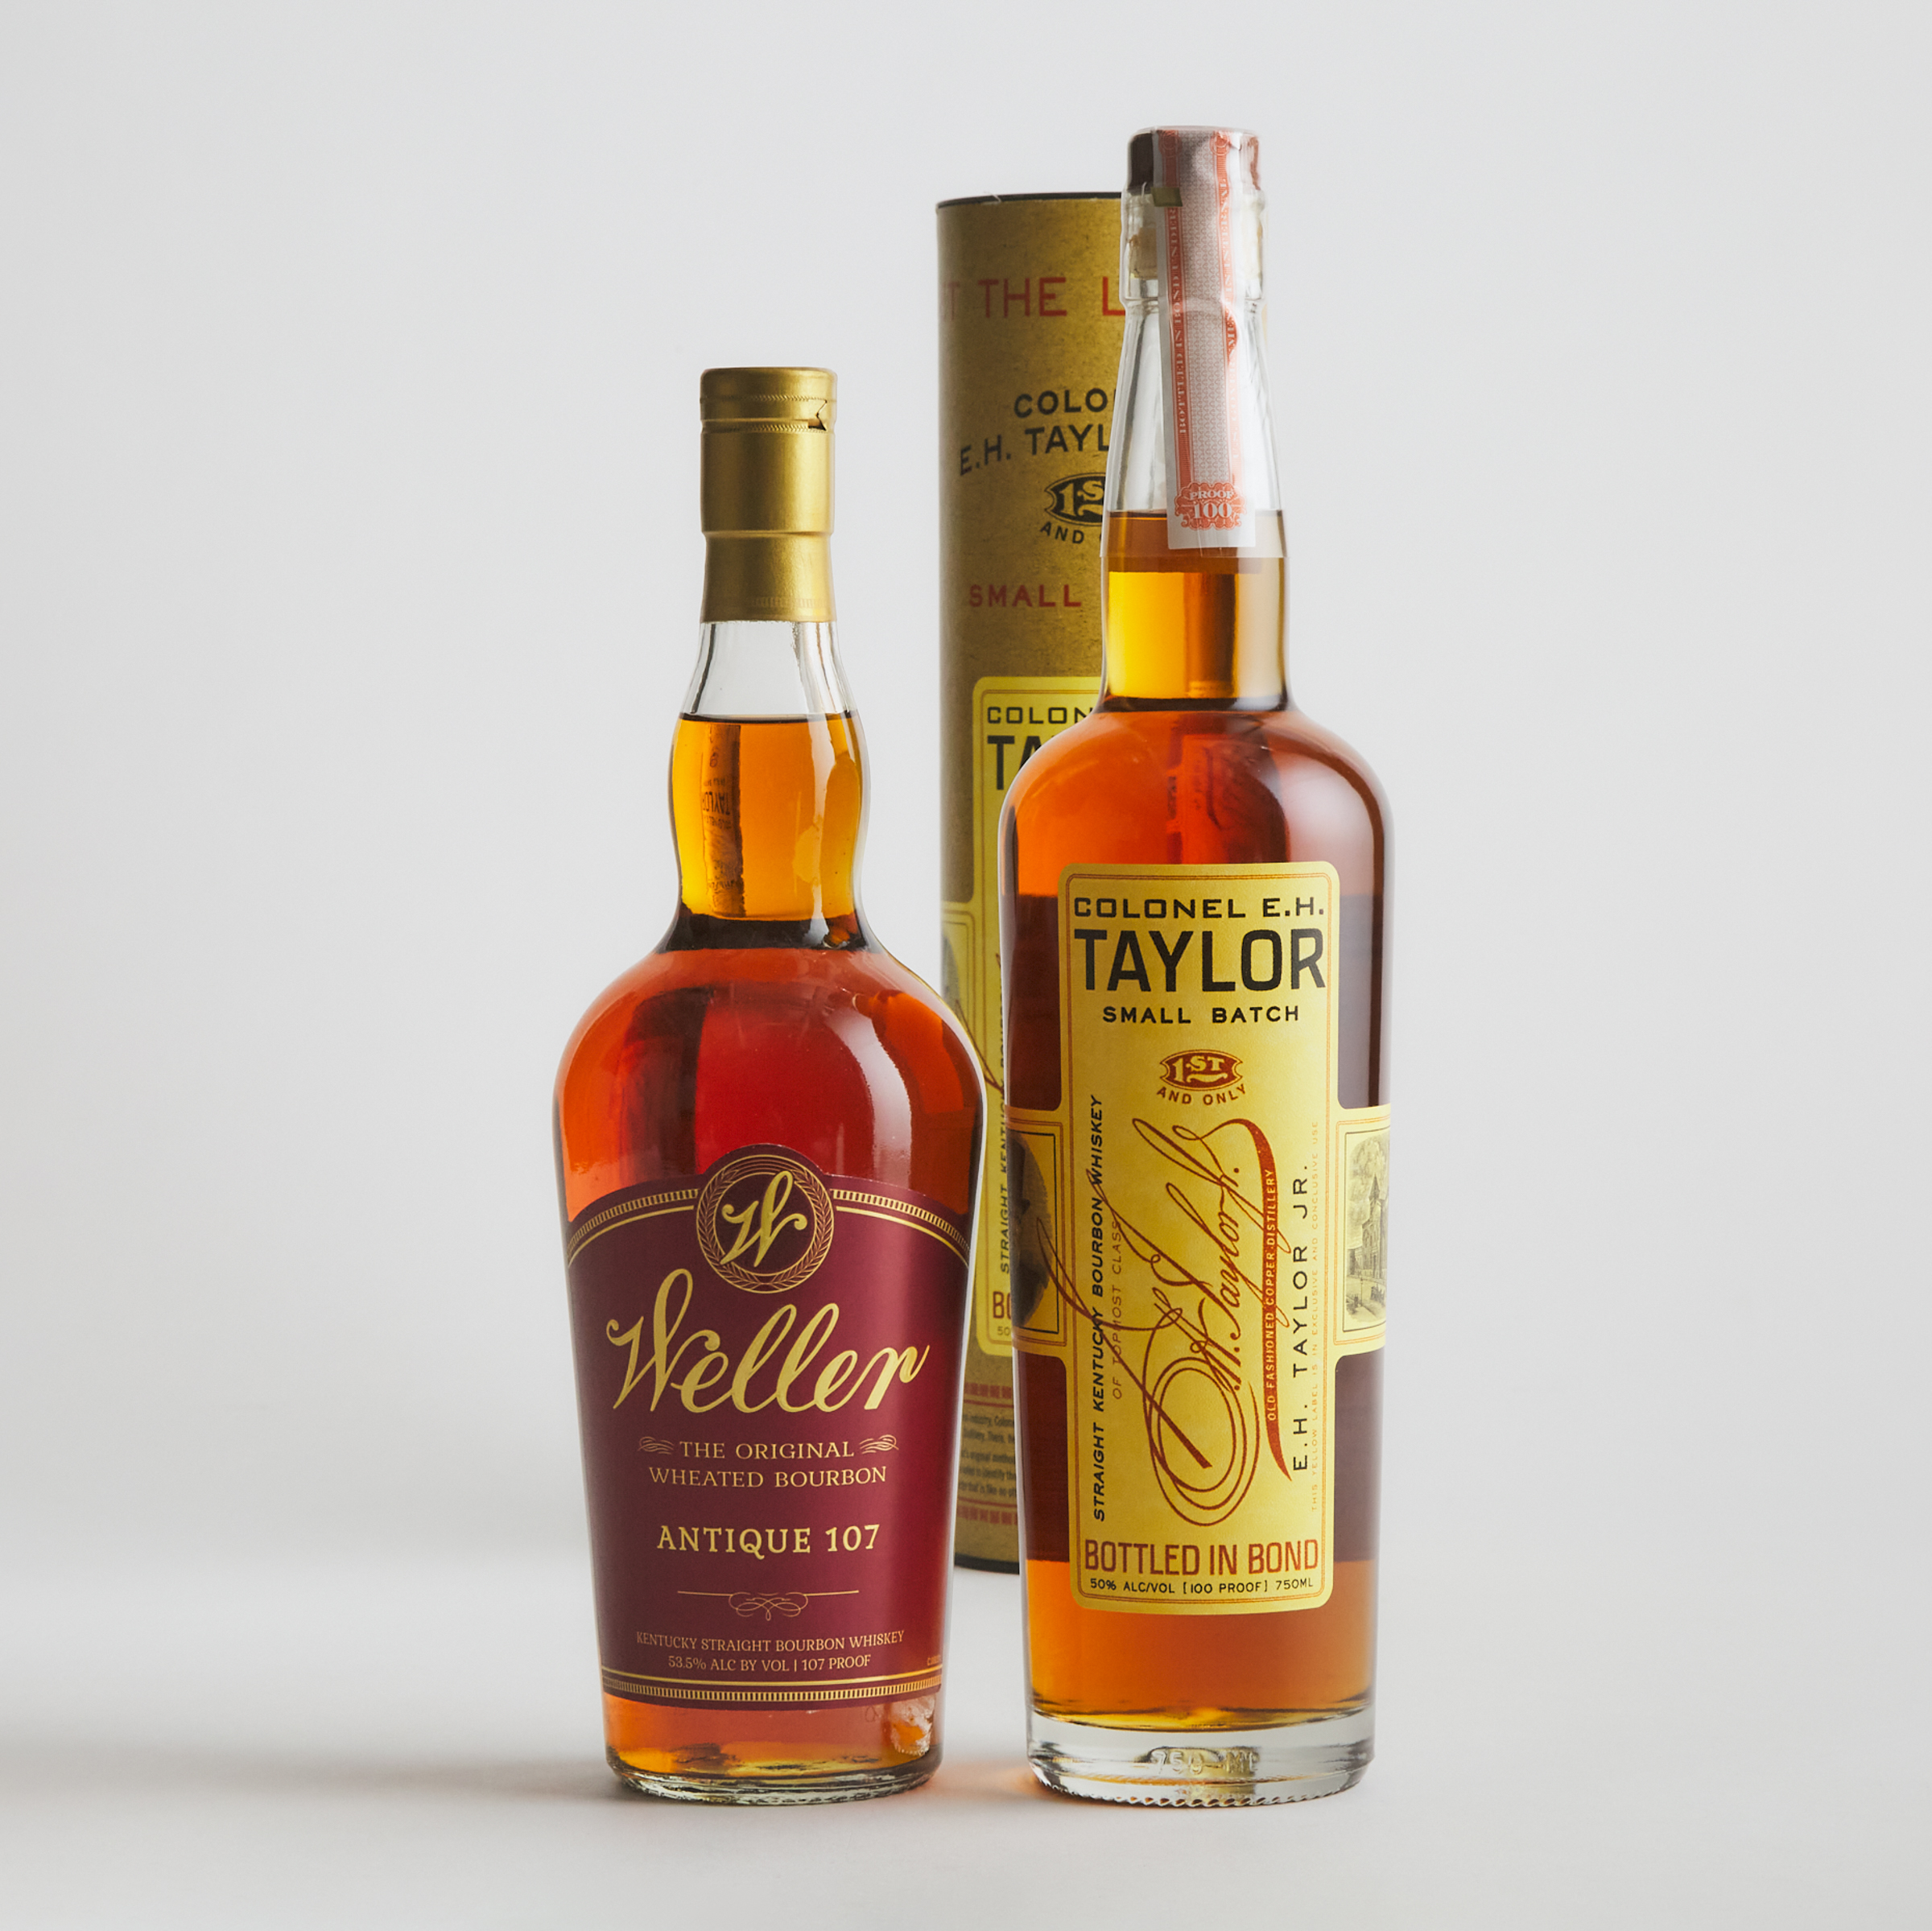 COLONEL E.H. TAYLOR JR. SMALL BATCH STRAIGHT KENTUCKY BOURBON WHISKEY (ONE 750 ML)
WELLER ANTIQUE 107 KENTUCKY STRAIGHT WHEATED BOURBON WHISKEY (ONE 750 ML)